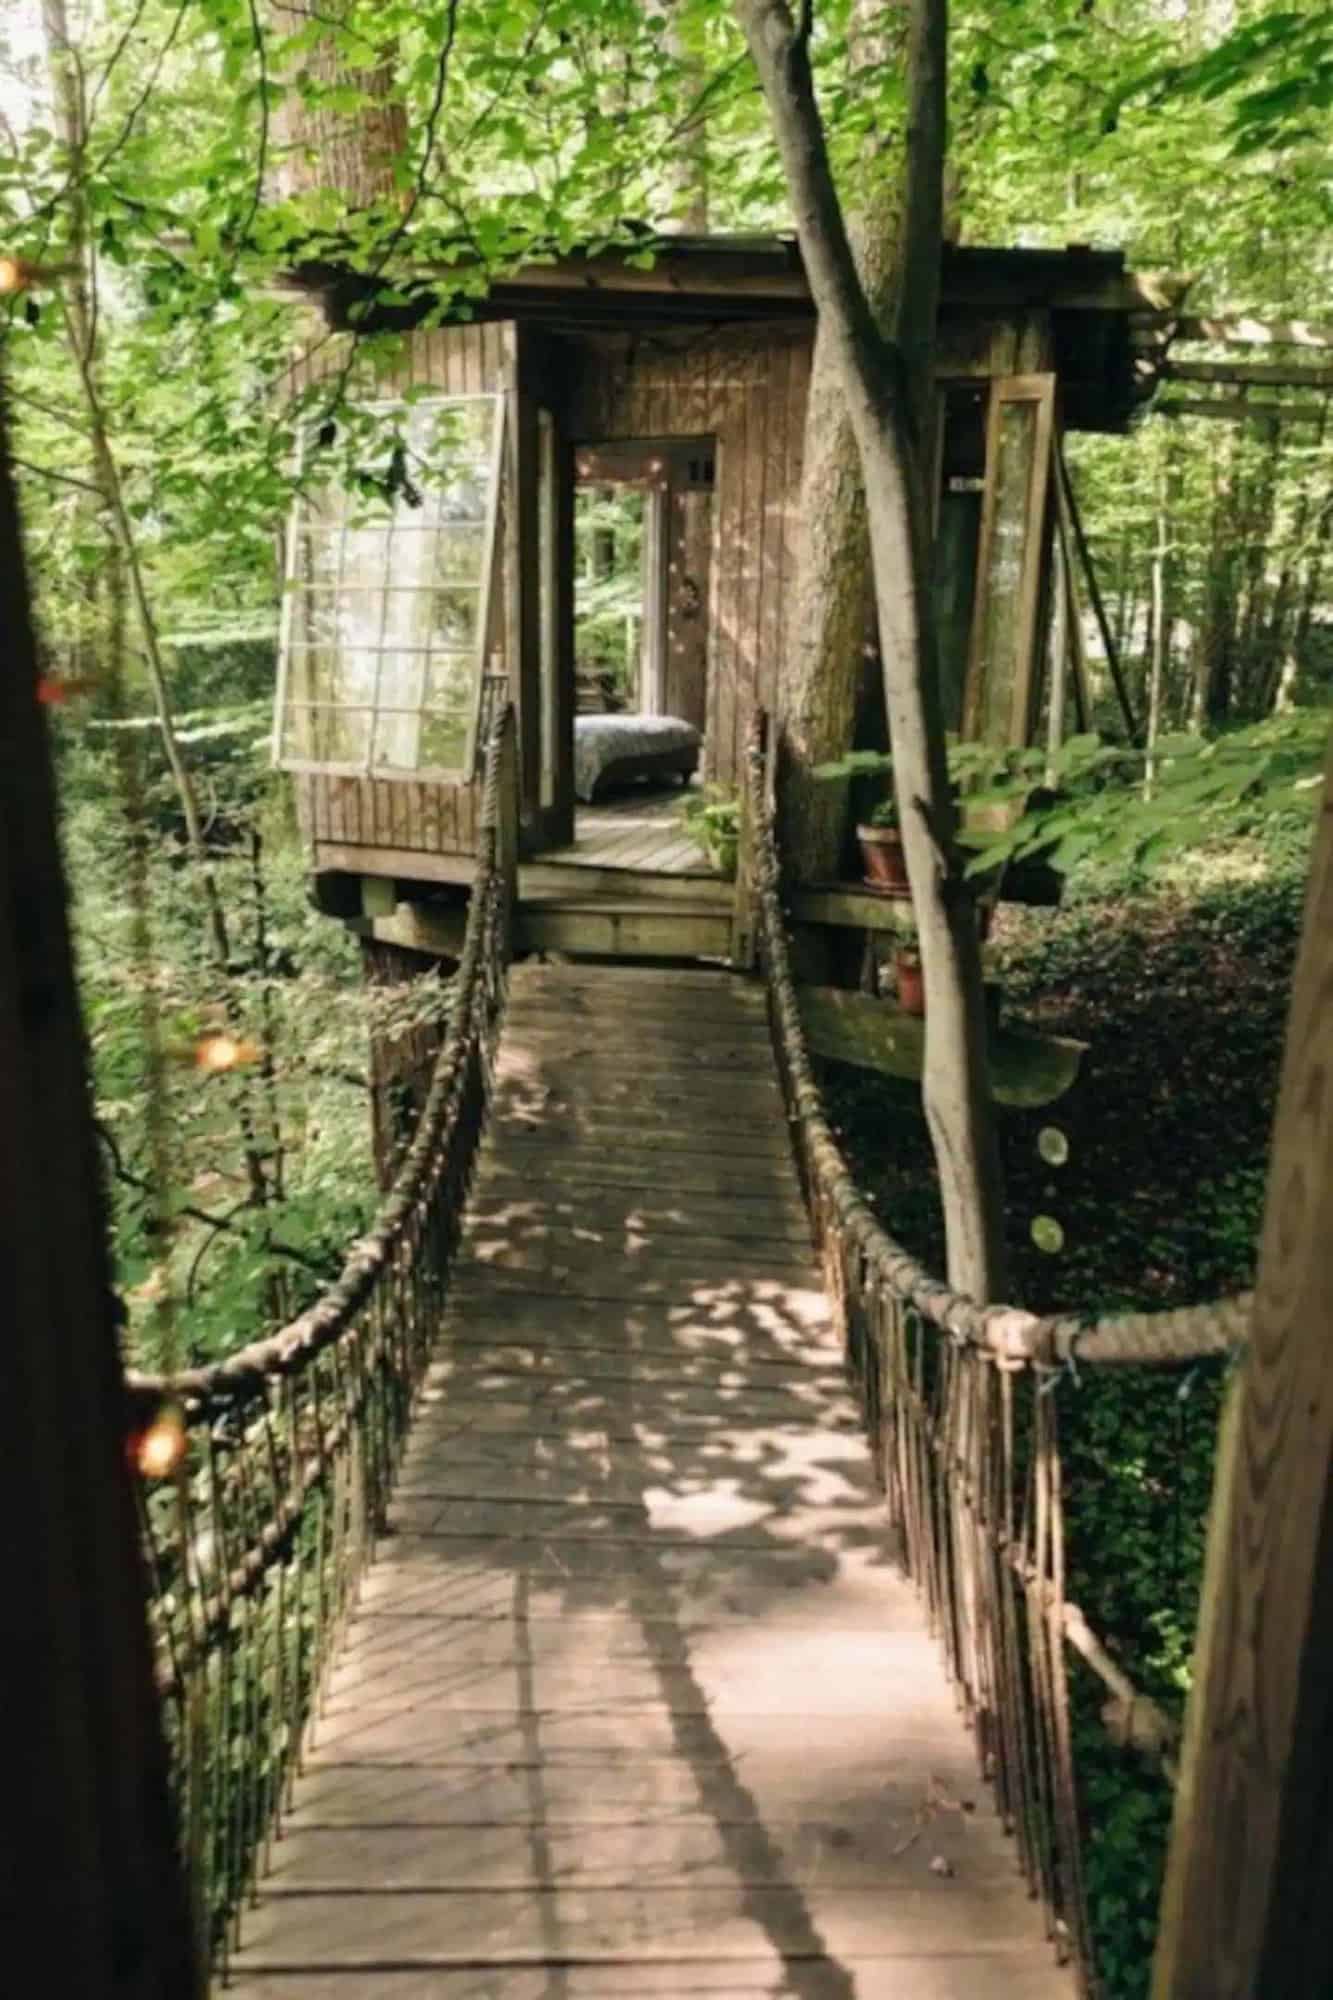 treehouse exterior with a hanging rope bridge